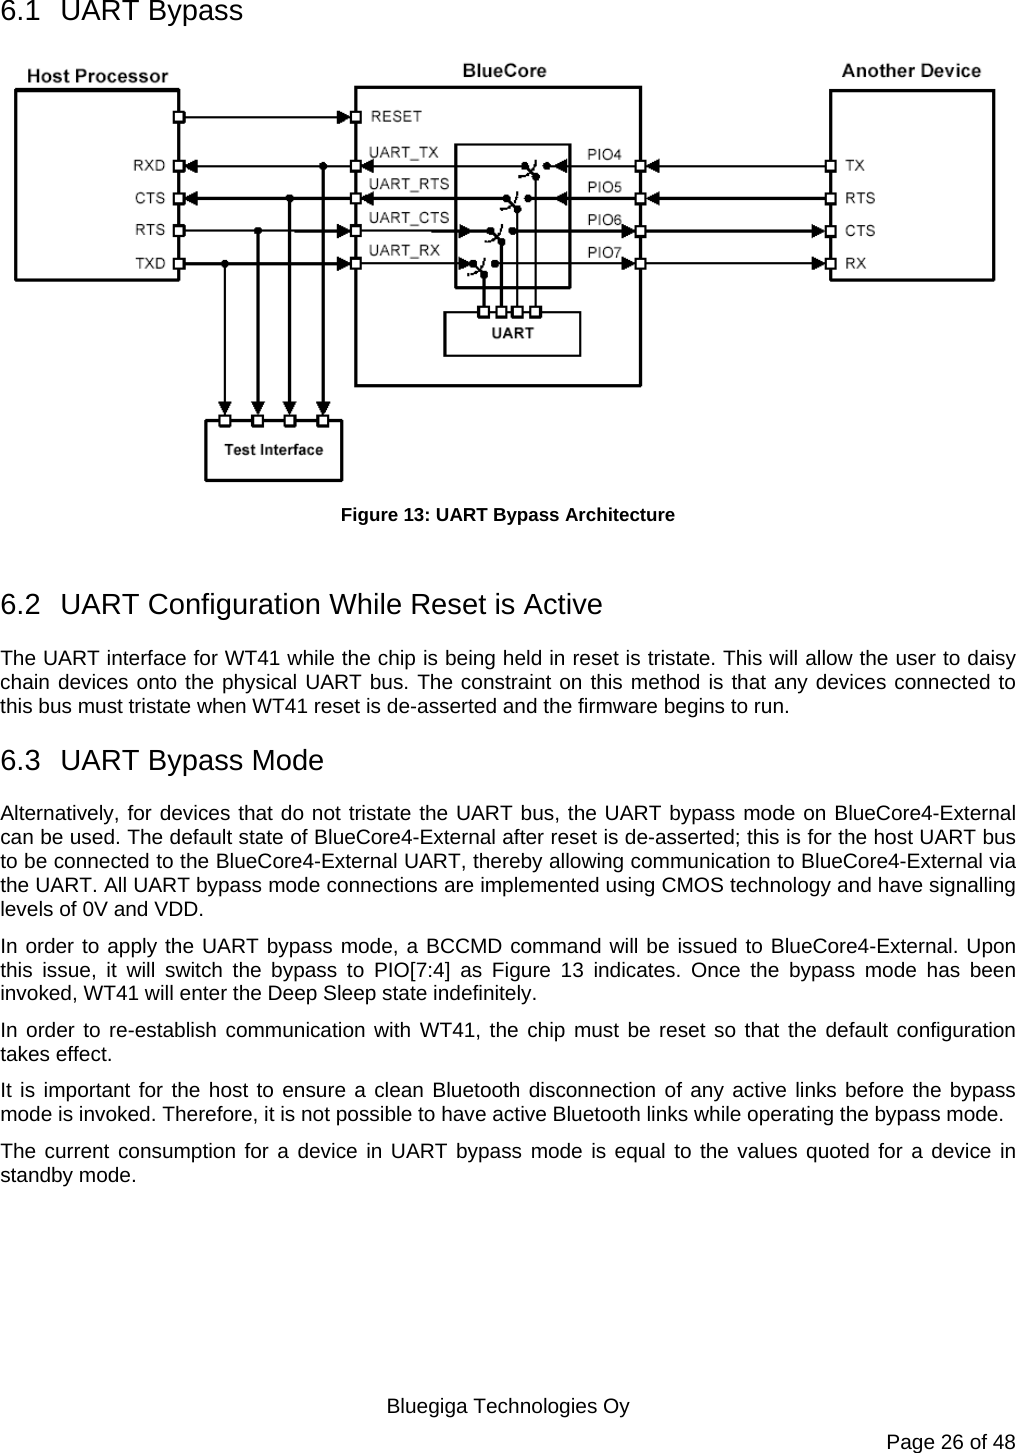   Bluegiga Technologies Oy Page 26 of 48 6.1 UART Bypass  Figure 13: UART Bypass Architecture  6.2  UART Configuration While Reset is Active The UART interface for WT41 while the chip is being held in reset is tristate. This will allow the user to daisy chain devices onto the physical UART bus. The constraint on this method is that any devices connected to this bus must tristate when WT41 reset is de-asserted and the firmware begins to run. 6.3 UART Bypass Mode Alternatively, for devices that do not tristate the UART bus, the UART bypass mode on BlueCore4-External can be used. The default state of BlueCore4-External after reset is de-asserted; this is for the host UART bus to be connected to the BlueCore4-External UART, thereby allowing communication to BlueCore4-External via the UART. All UART bypass mode connections are implemented using CMOS technology and have signalling levels of 0V and VDD. In order to apply the UART bypass mode, a BCCMD command will be issued to BlueCore4-External. Upon this issue, it will switch the bypass to PIO[7:4] as Figure 13 indicates. Once the bypass mode has been invoked, WT41 will enter the Deep Sleep state indefinitely. In order to re-establish communication with WT41, the chip must be reset so that the default configuration takes effect. It is important for the host to ensure a clean Bluetooth disconnection of any active links before the bypass mode is invoked. Therefore, it is not possible to have active Bluetooth links while operating the bypass mode. The current consumption for a device in UART bypass mode is equal to the values quoted for a device in standby mode. 